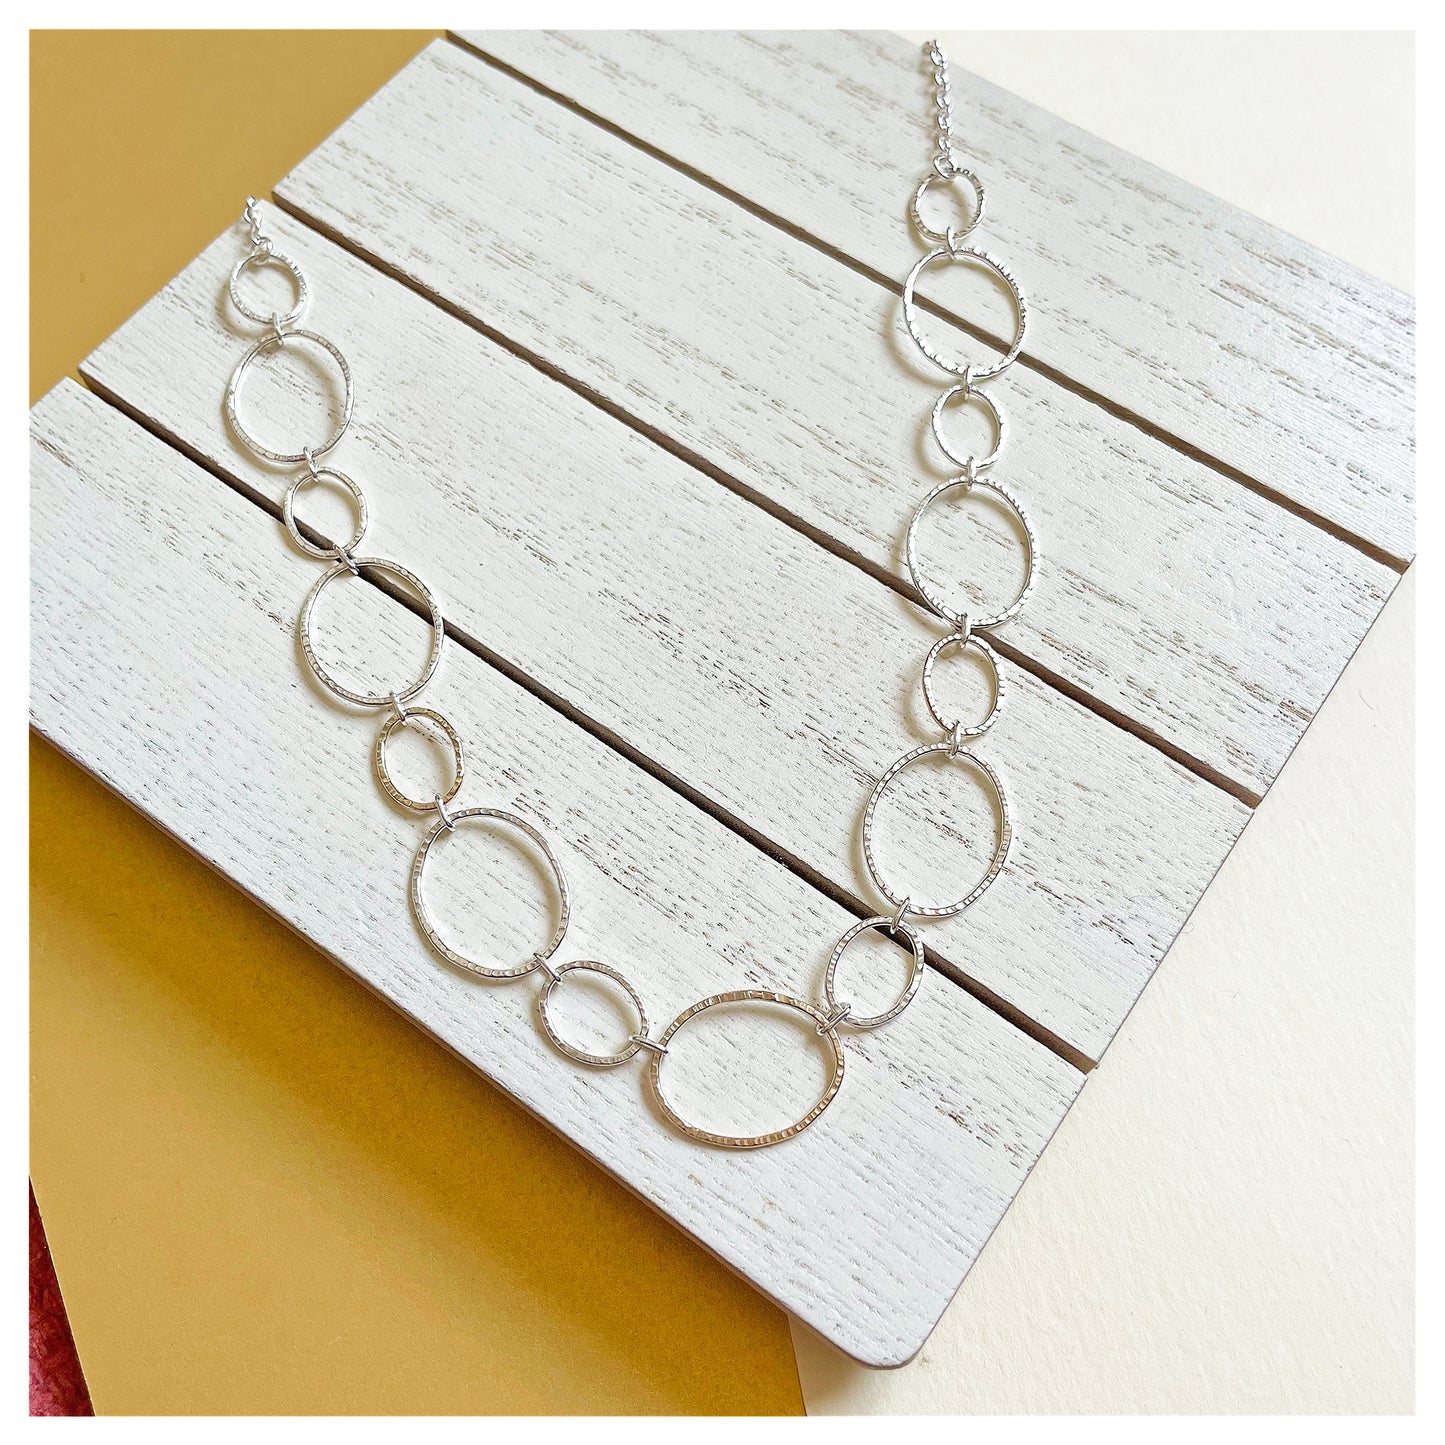 9ct Yellow Gold and Sterling Silver Oval Link Handmade Chain.